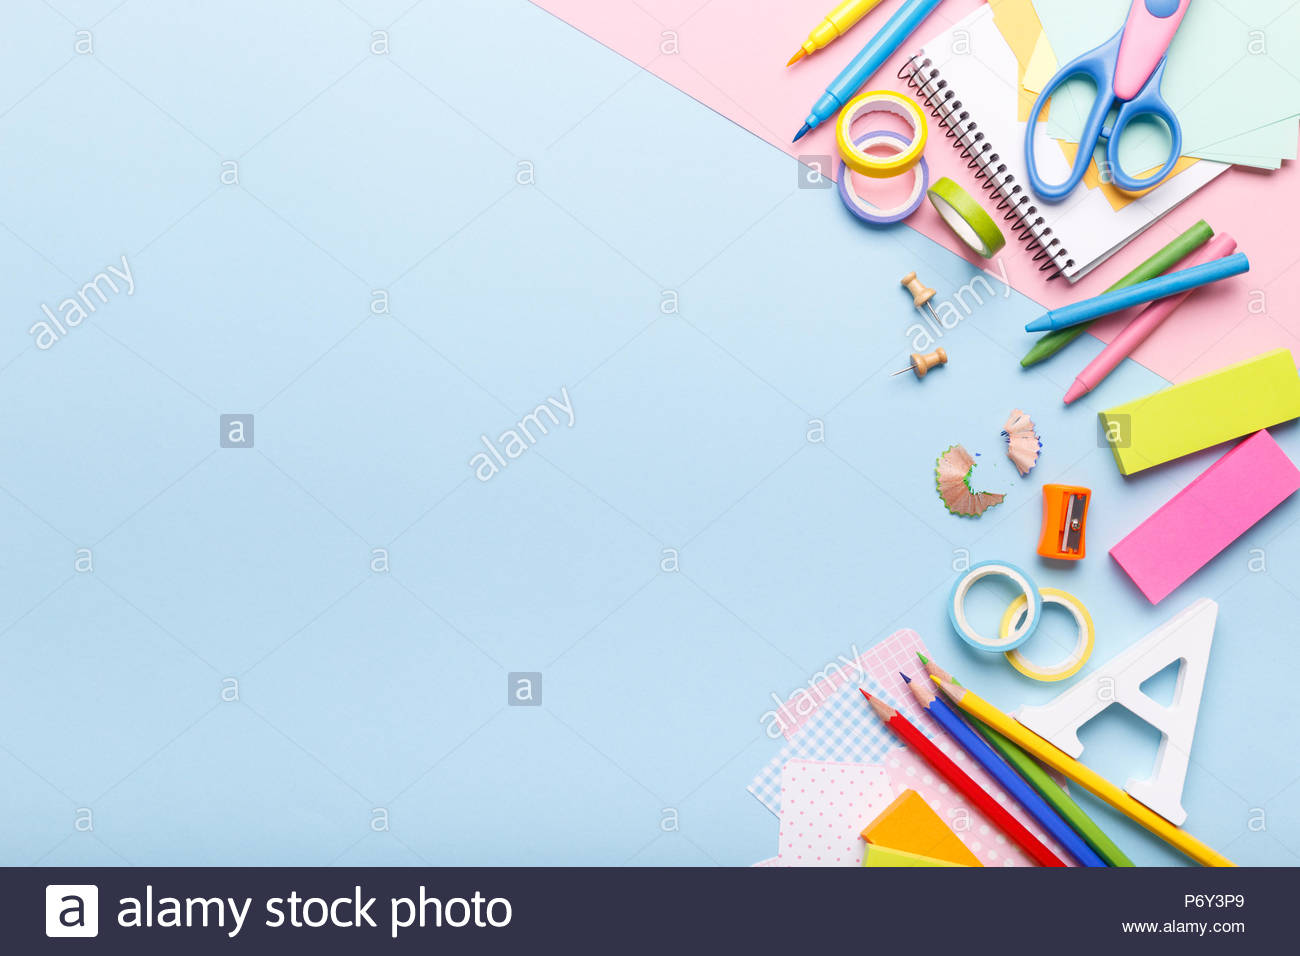 Colorful Stationary School Supplies On Blue Trending Background